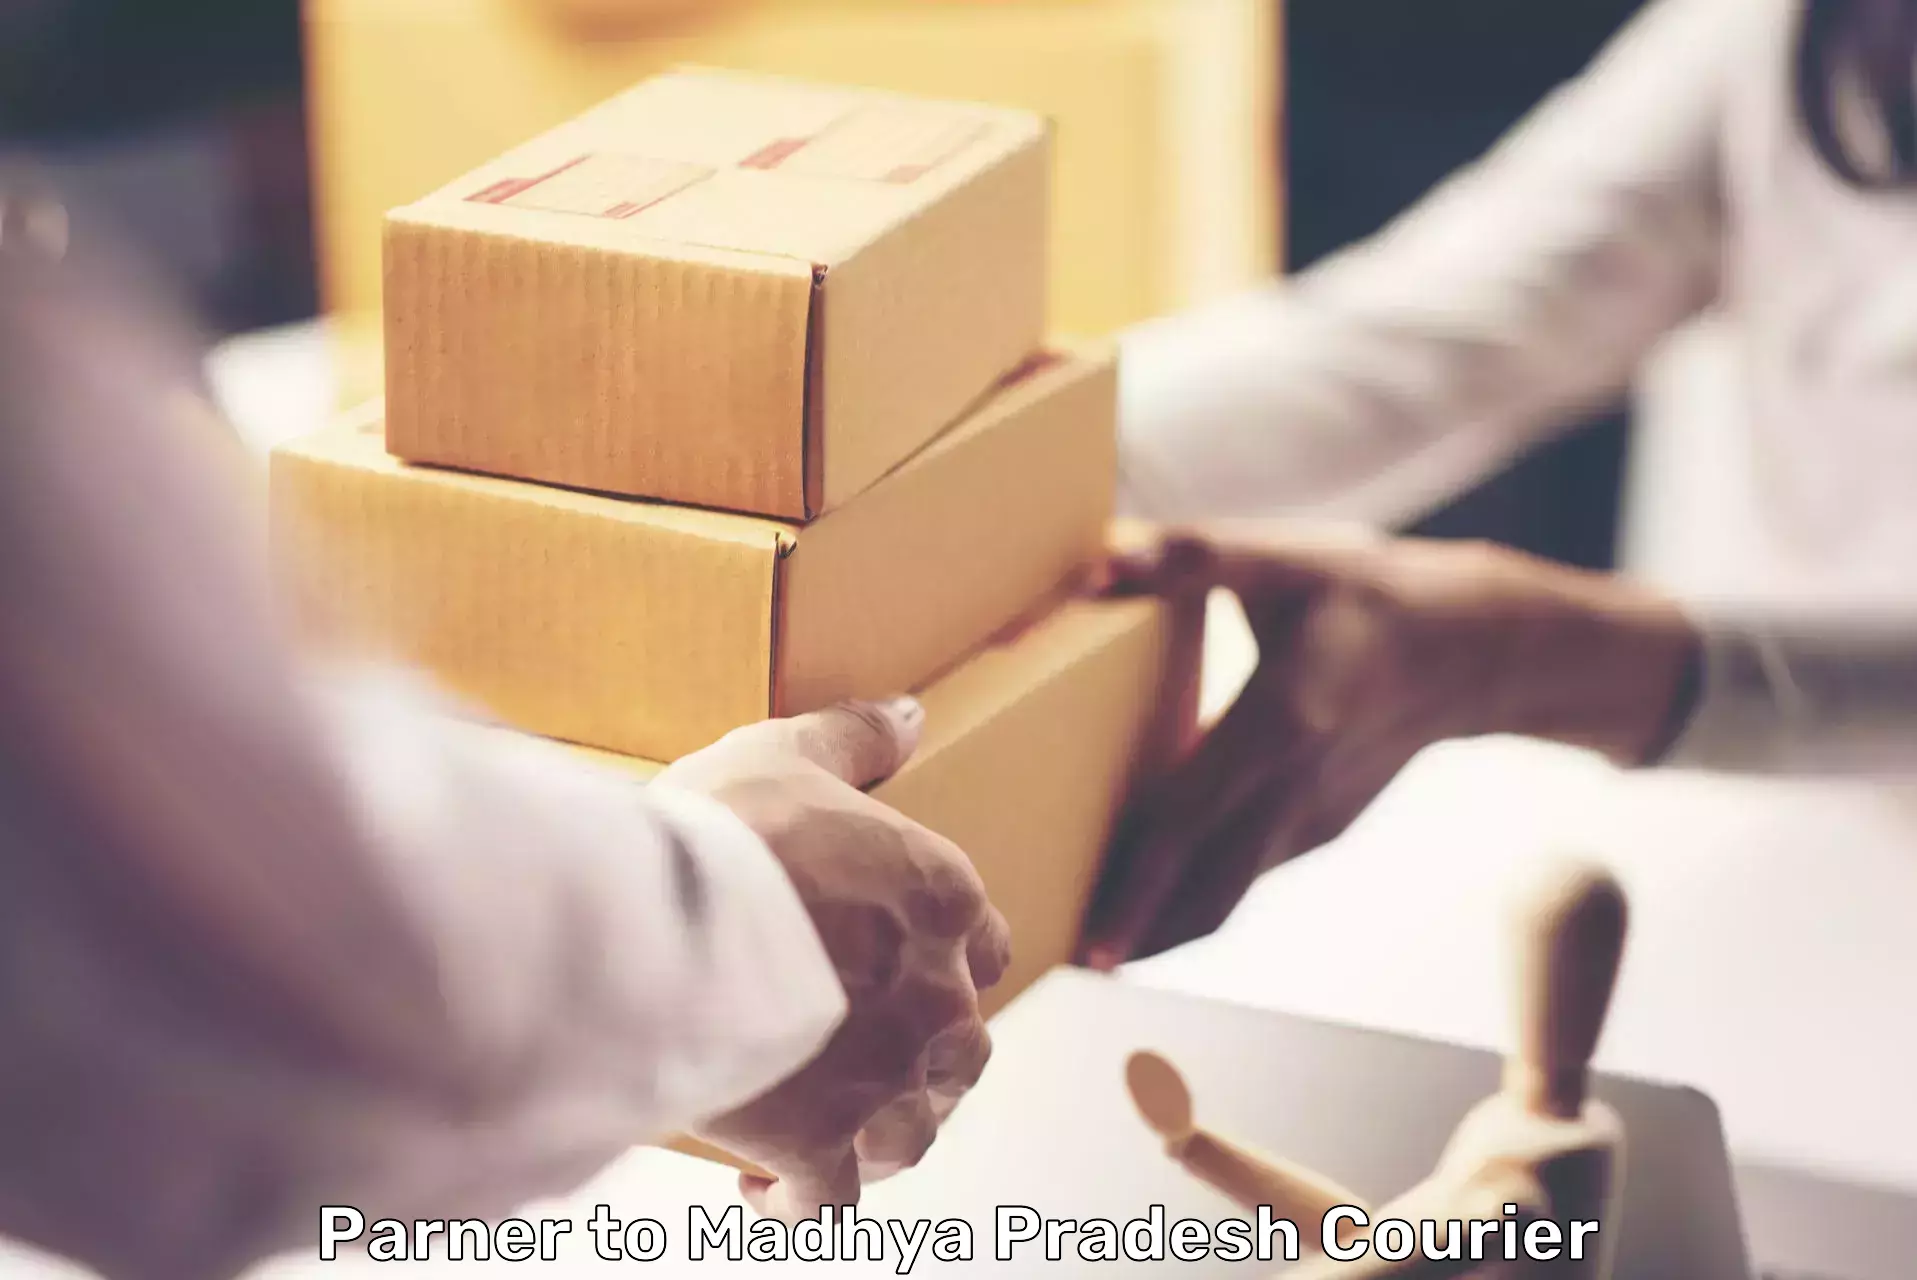 Residential courier service Parner to Madhya Pradesh